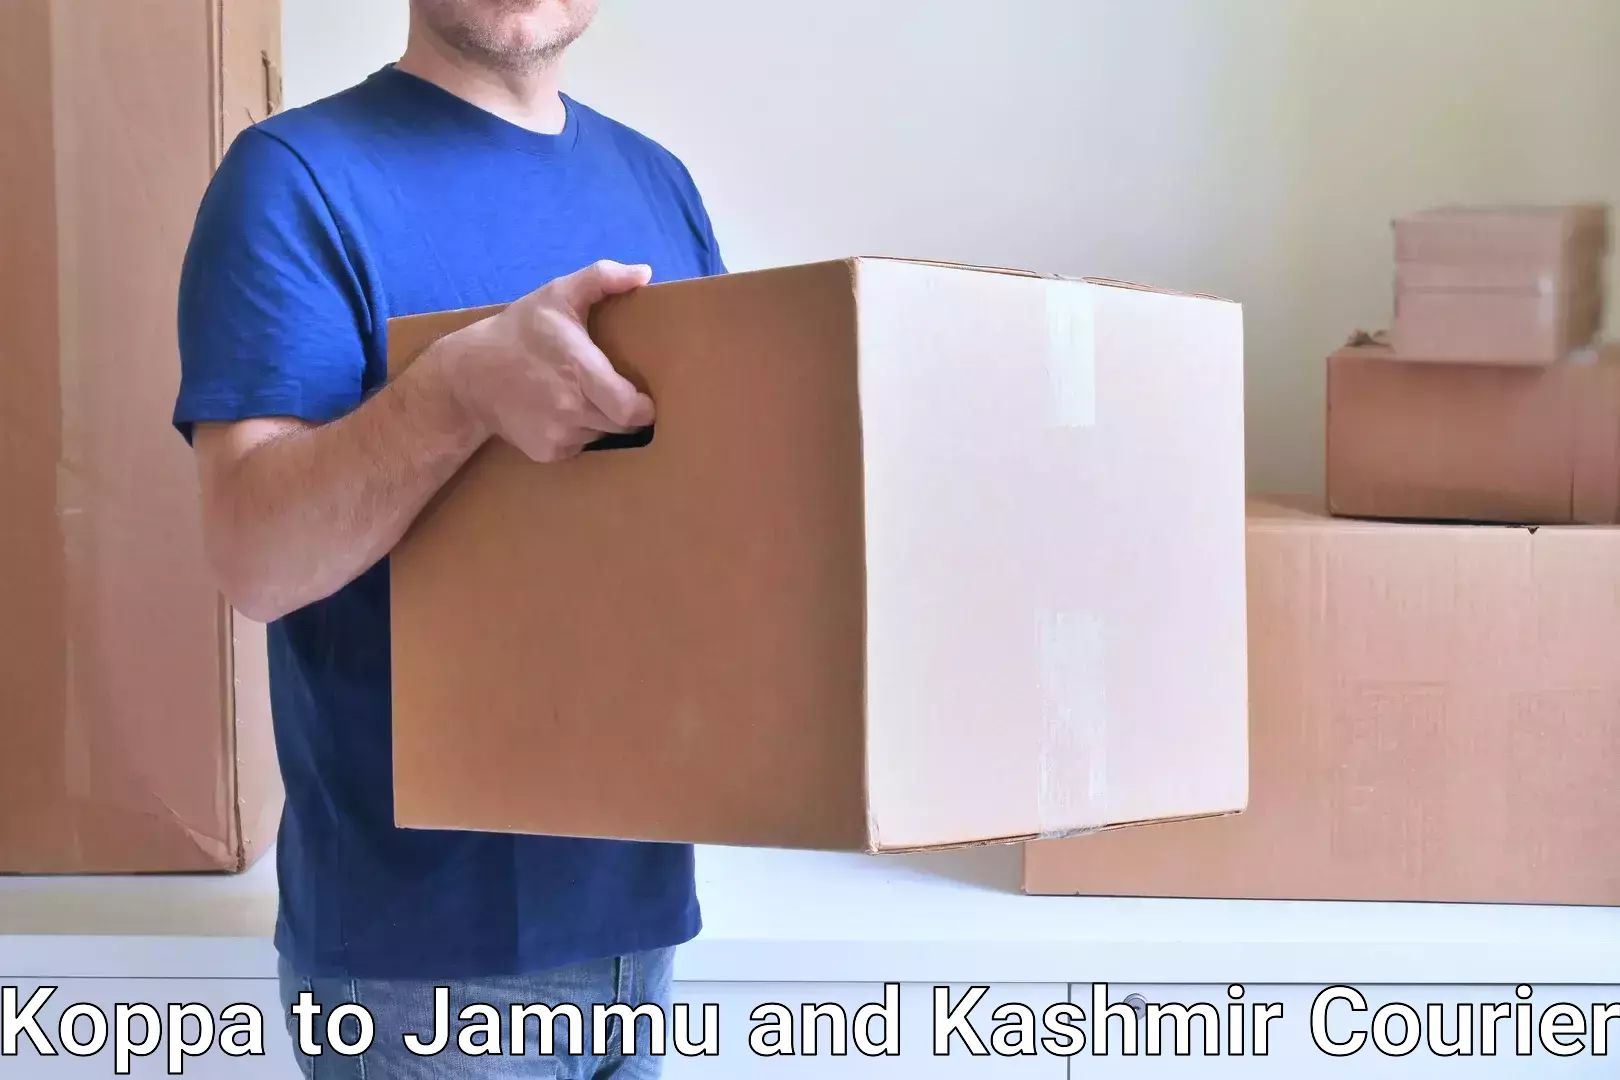 Large package courier in Koppa to Rajouri